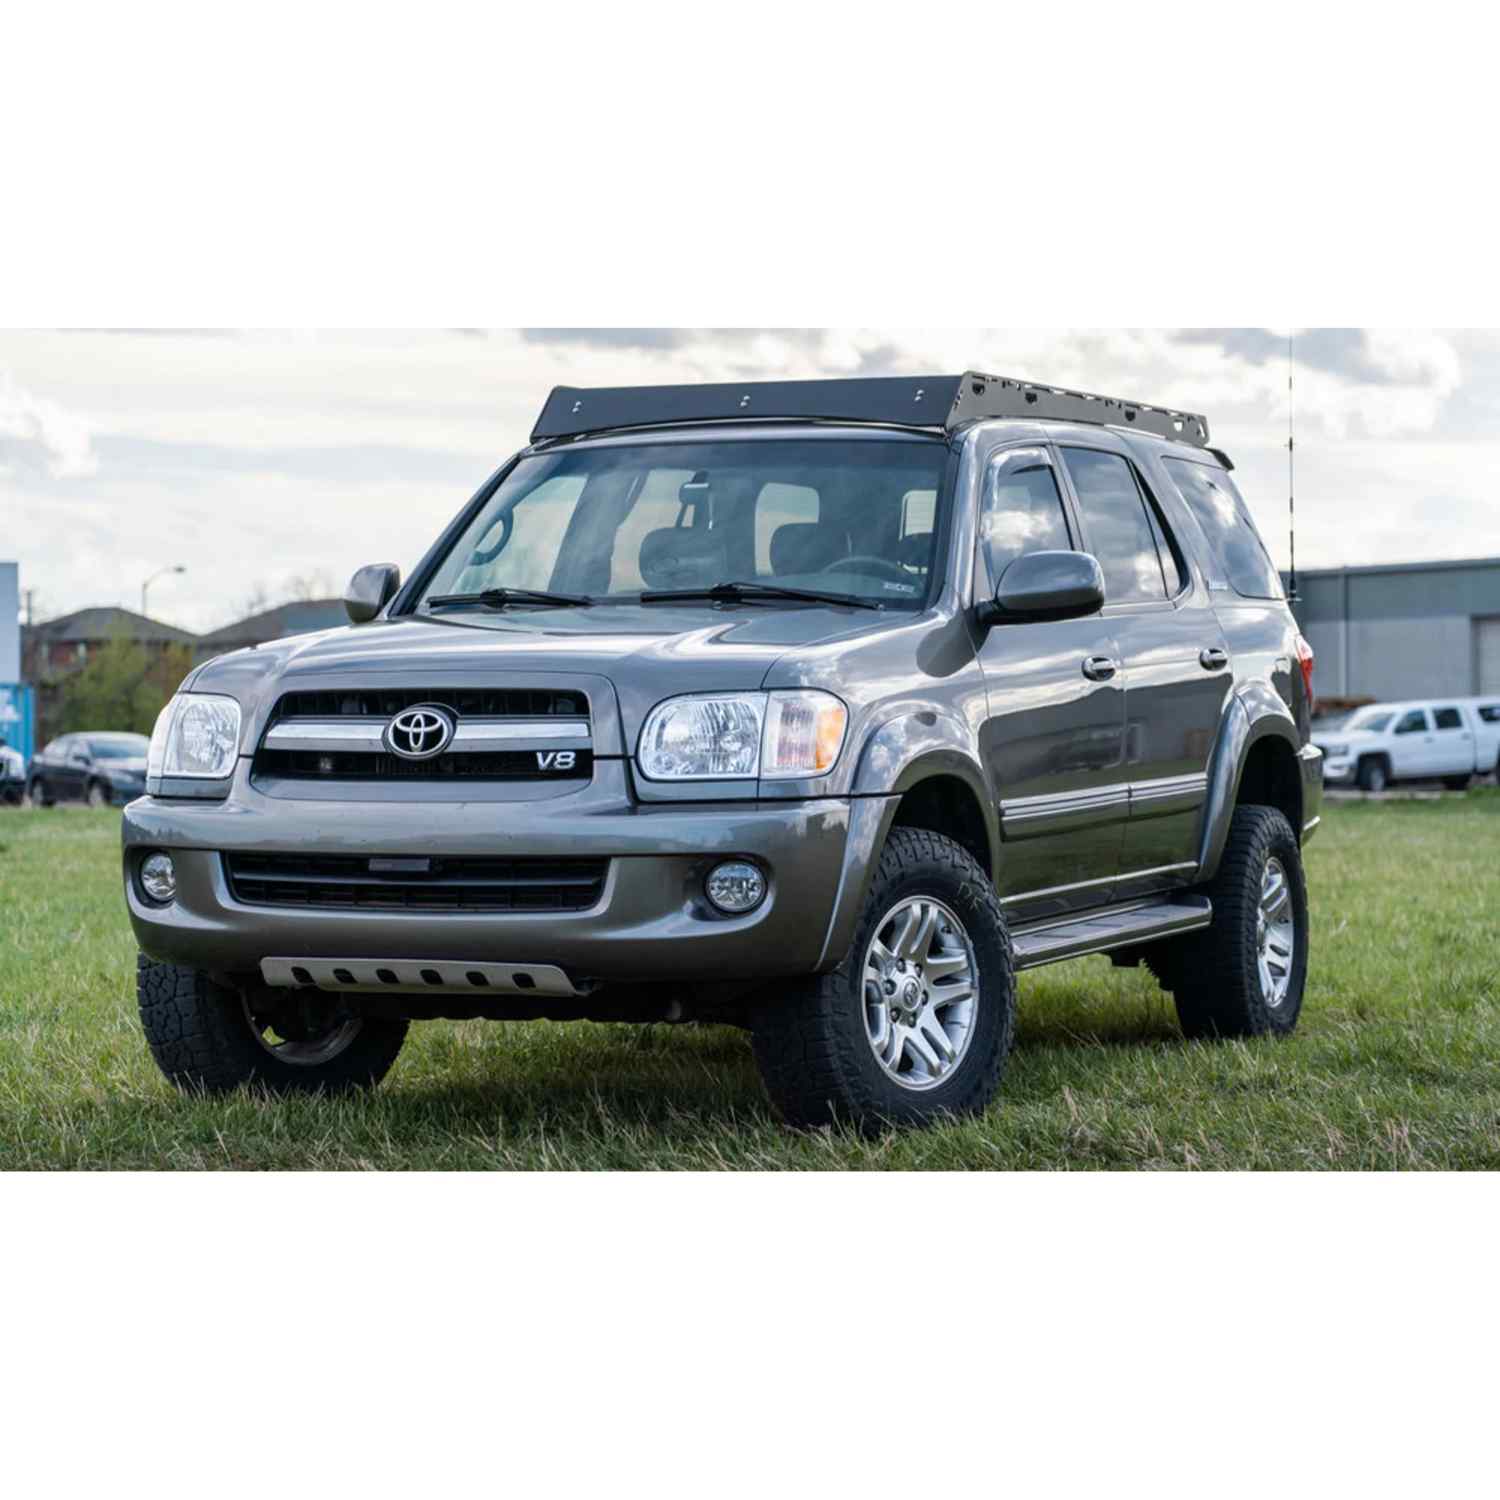 Sherpa Belford 2001-2007 Toyota Sequoia Roof Rack Front View